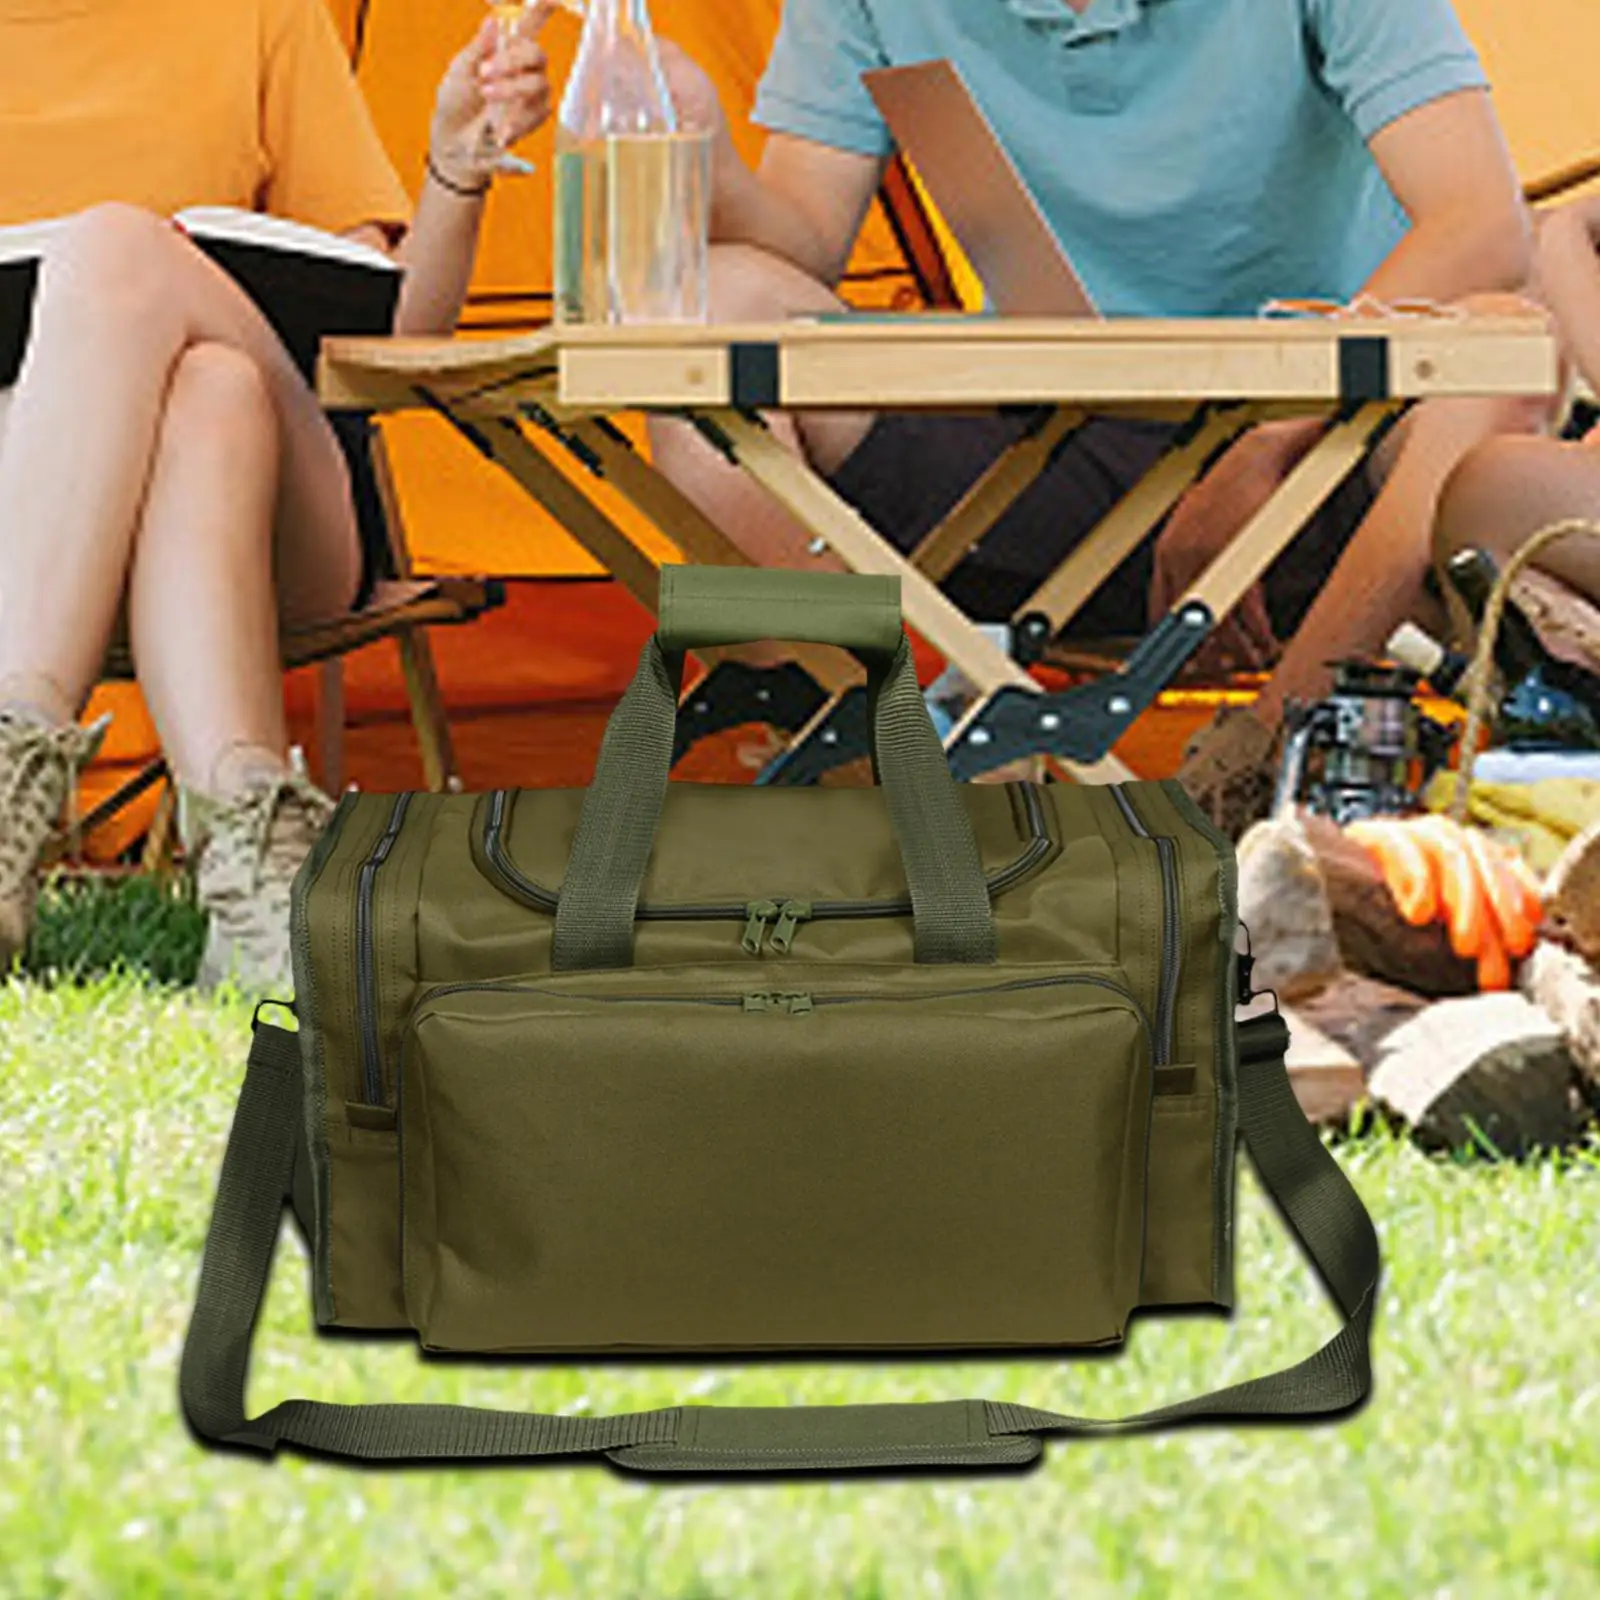 Camping Bag Lunch Box Durable Oxford Cloth Large Capacity Picnic Basket for Fishing Trip Hiking Beach